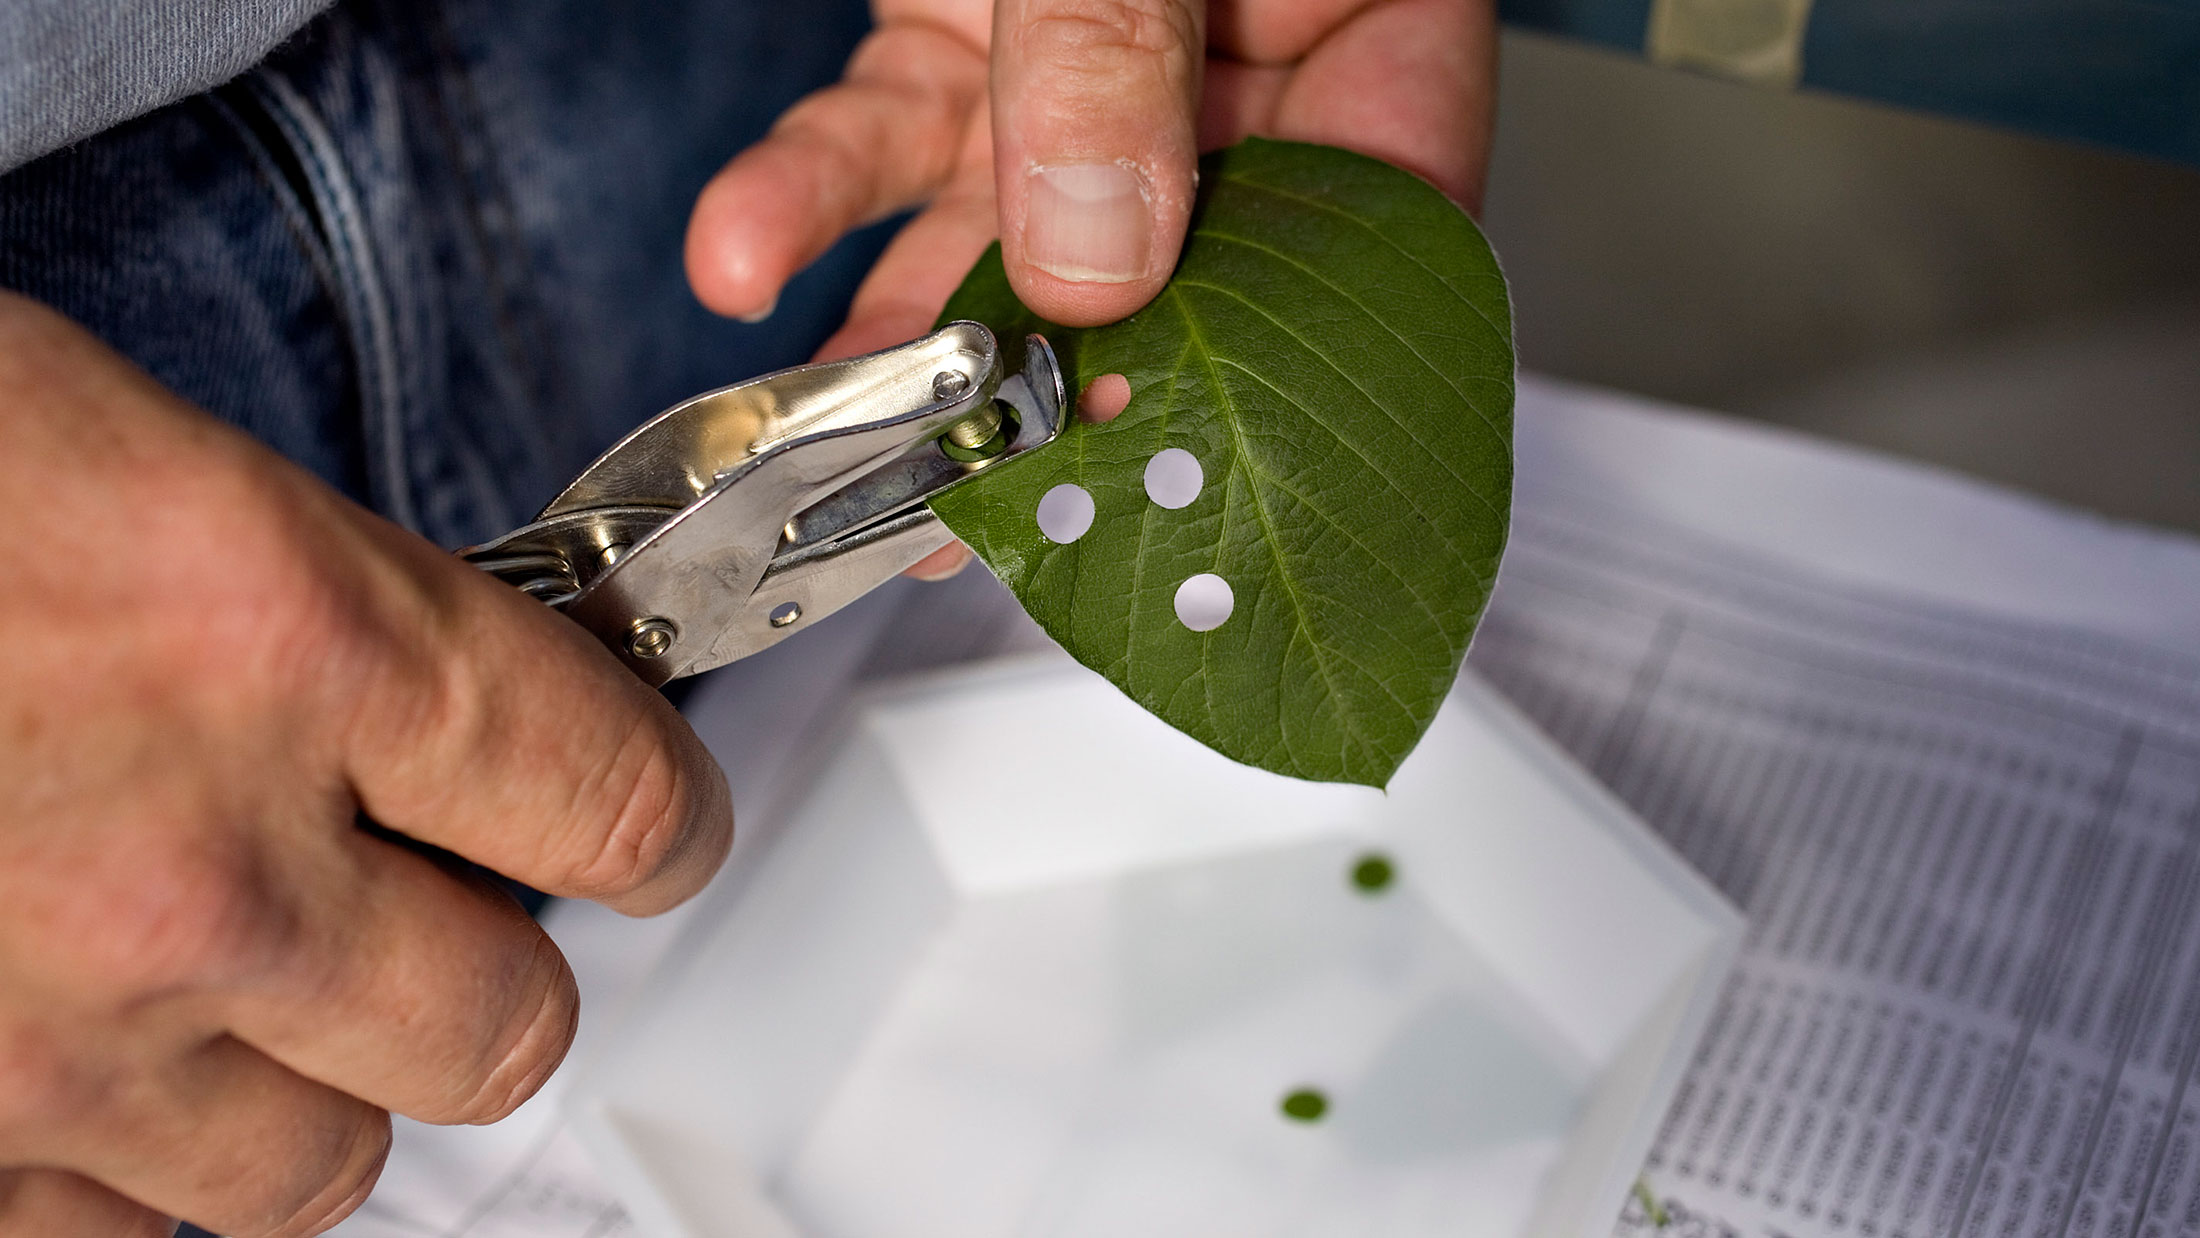 A researcher collects leaf samples at a Monsanto facility in Chesterfield, Missouri.
